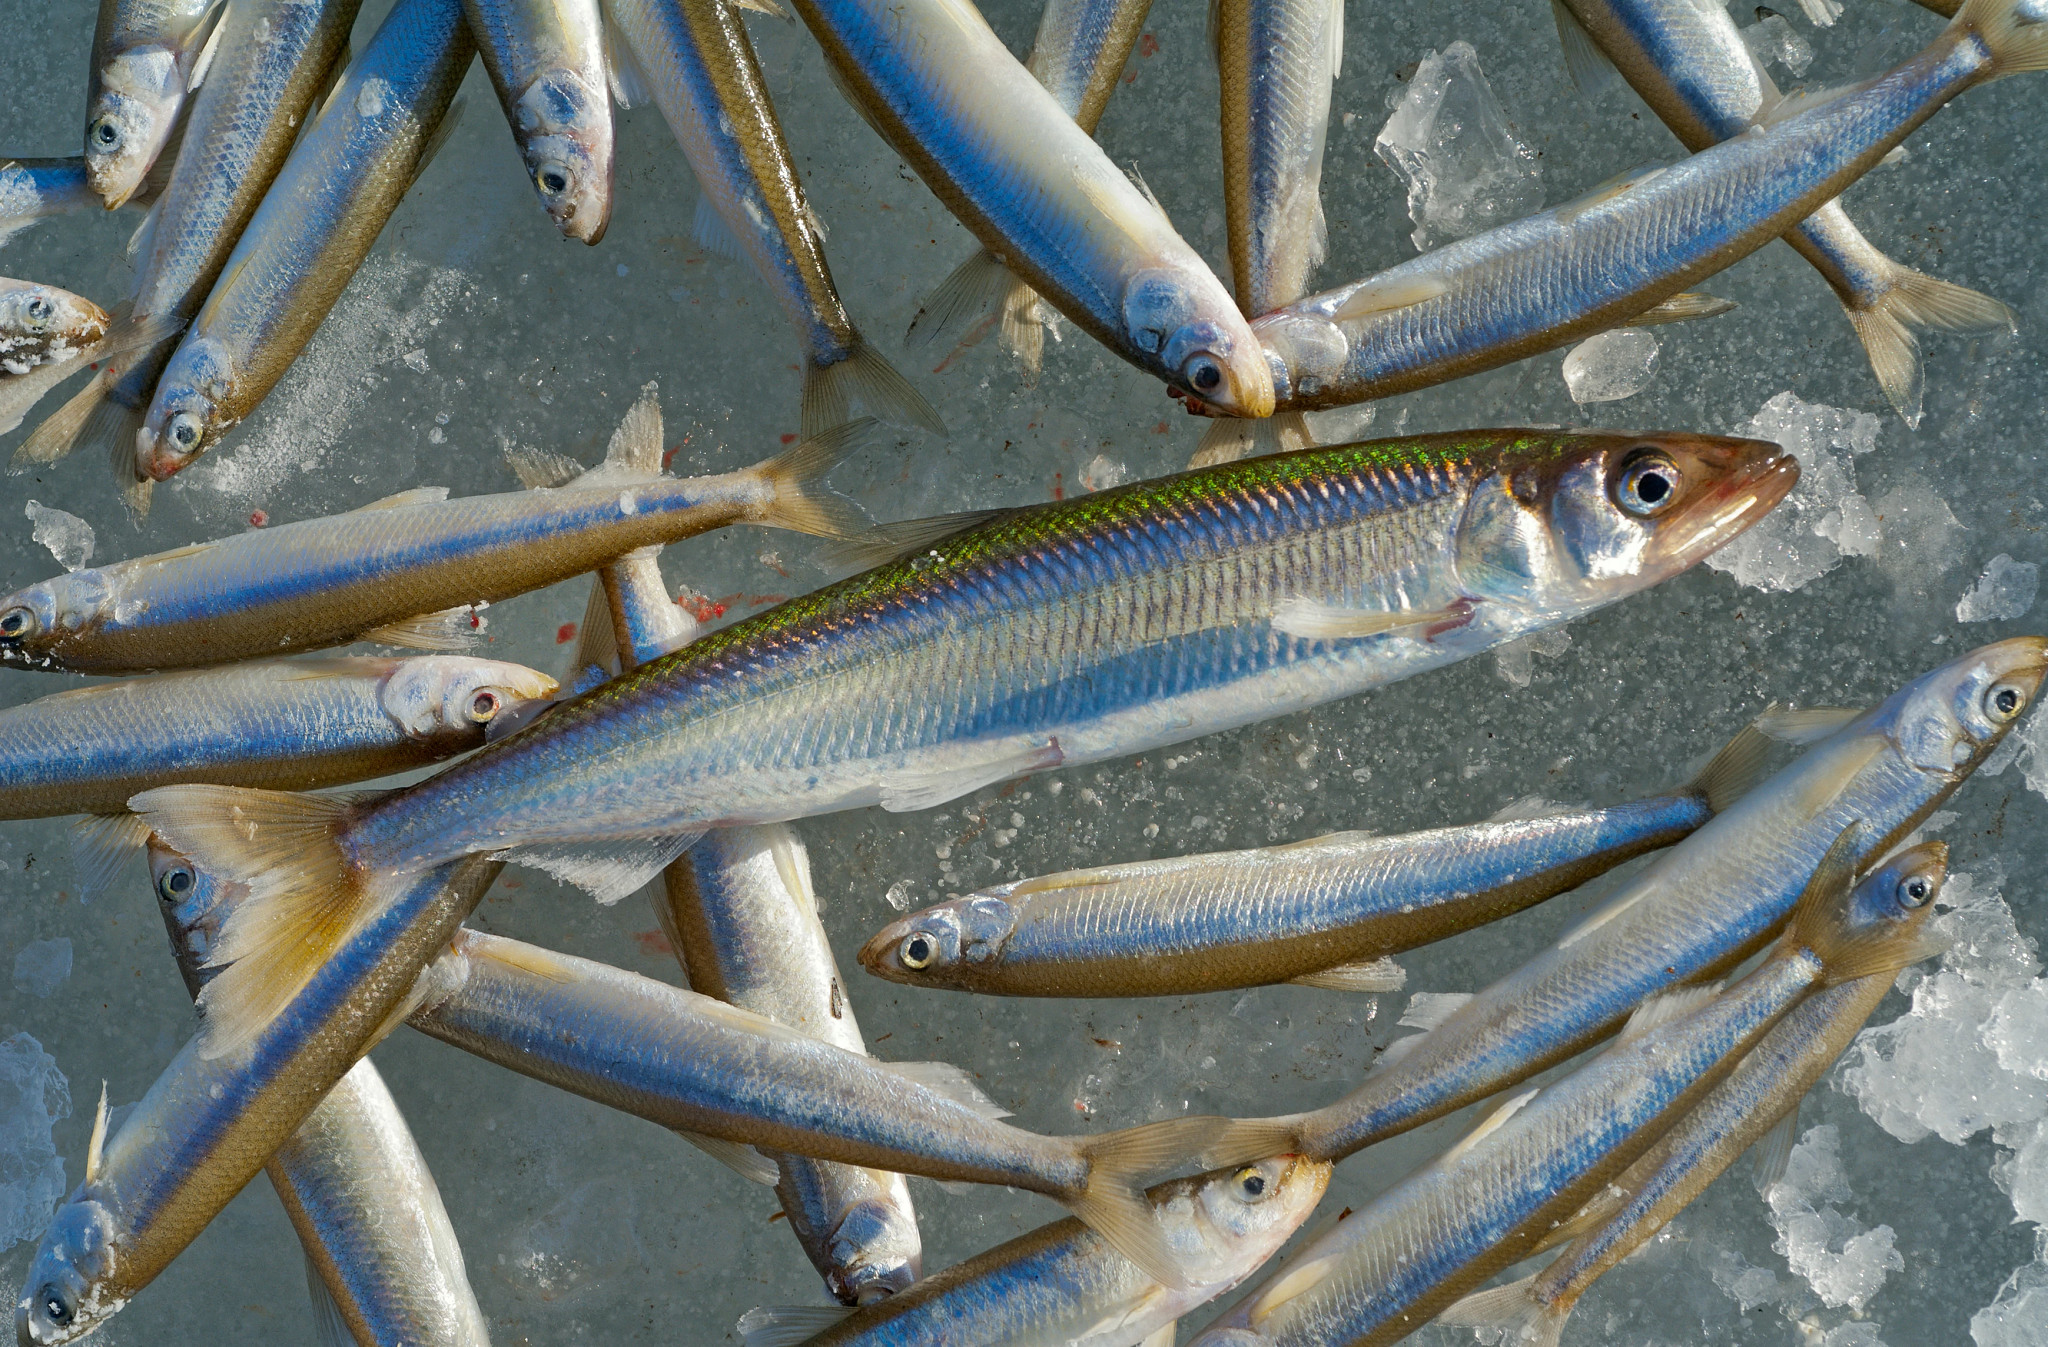 Catch on winter fishing. A close up of the fishes smelt on ice.